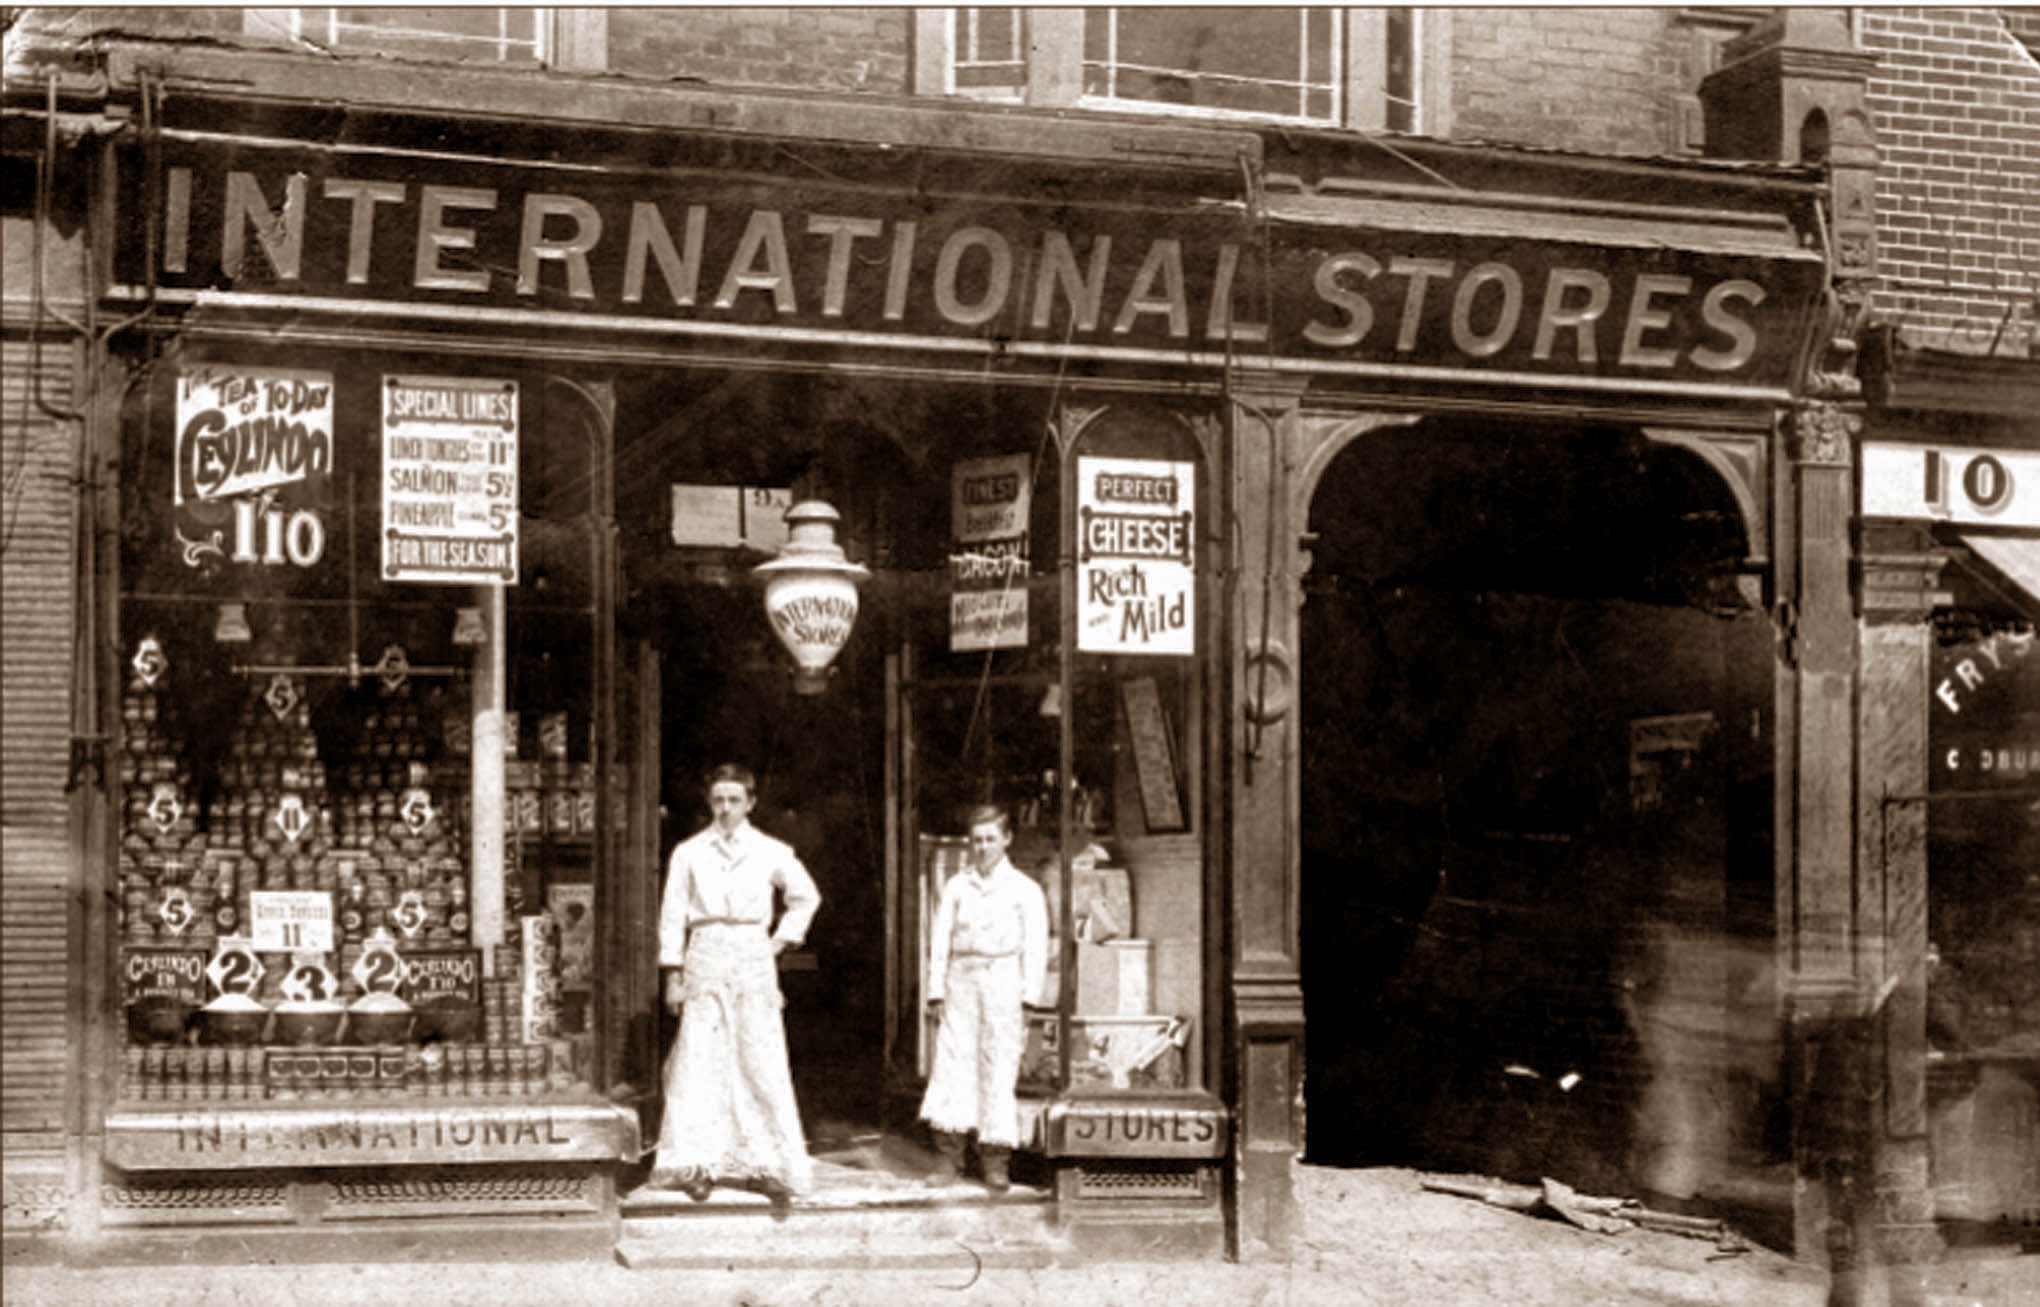 The International Stores later became the Wiliam Hill betting shop.